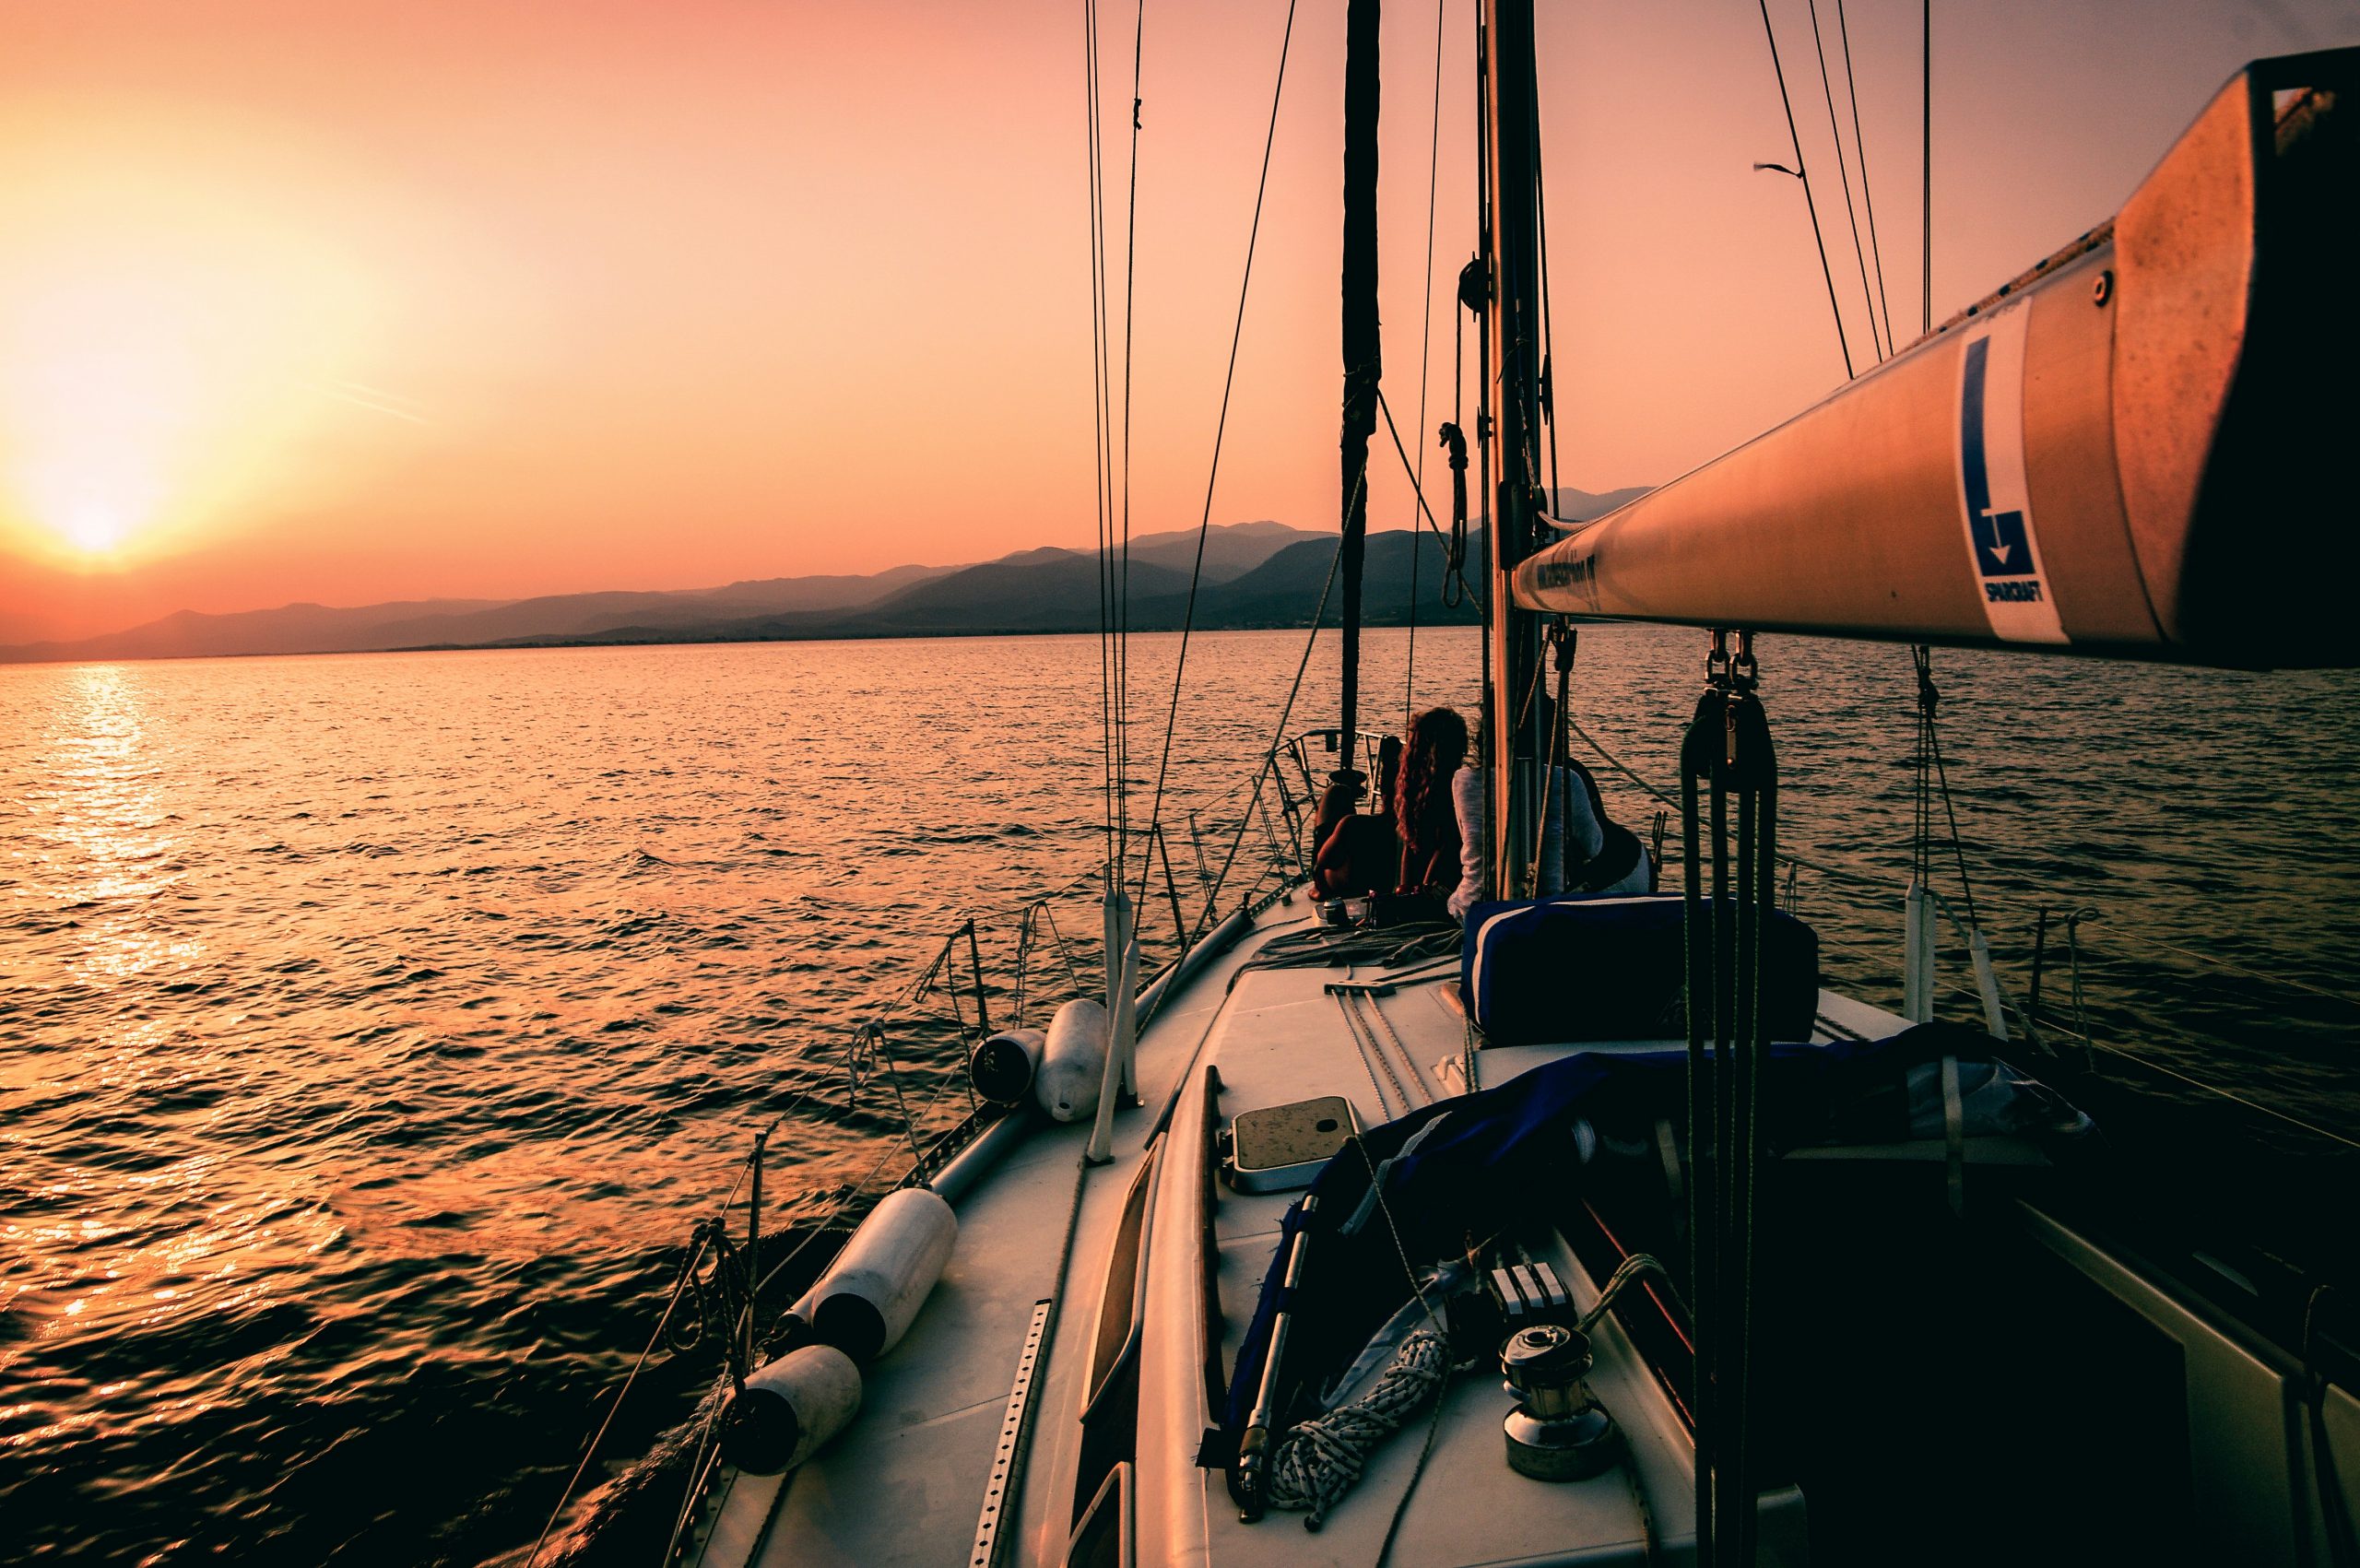 embark on an unforgettable sailing adventure and experience the freedom of the open sea. discover new horizons and create lasting memories on a sailing trip of a lifetime.